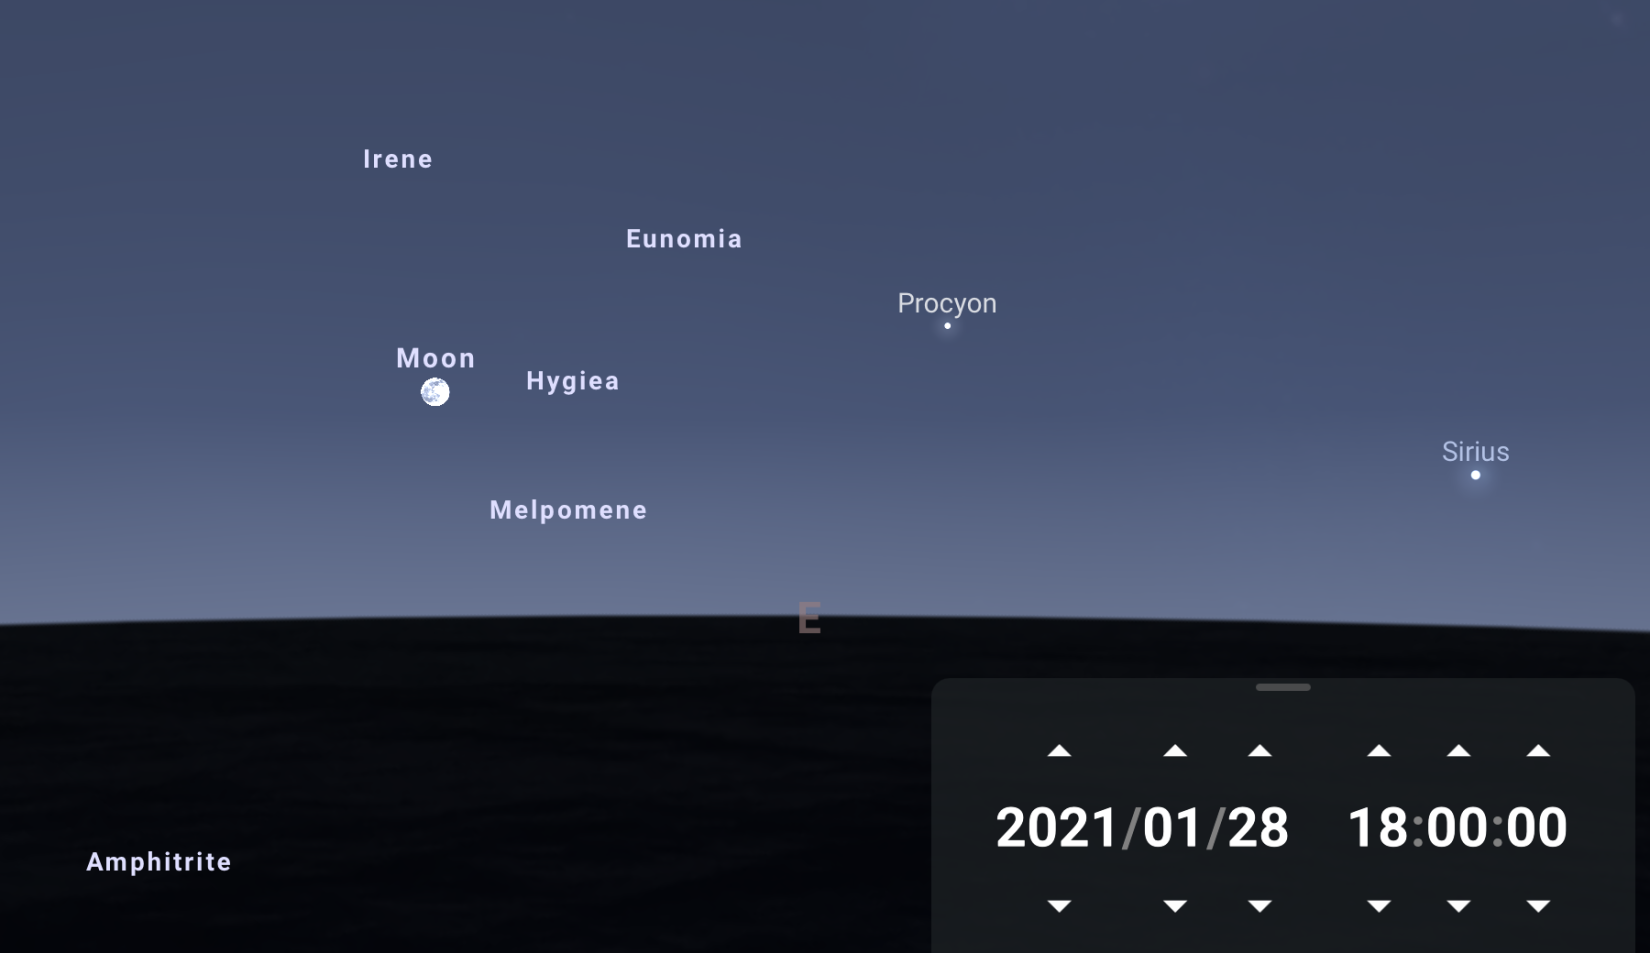 Screenshot from Stellarium showing the Full Moon on January 28th, 2021.